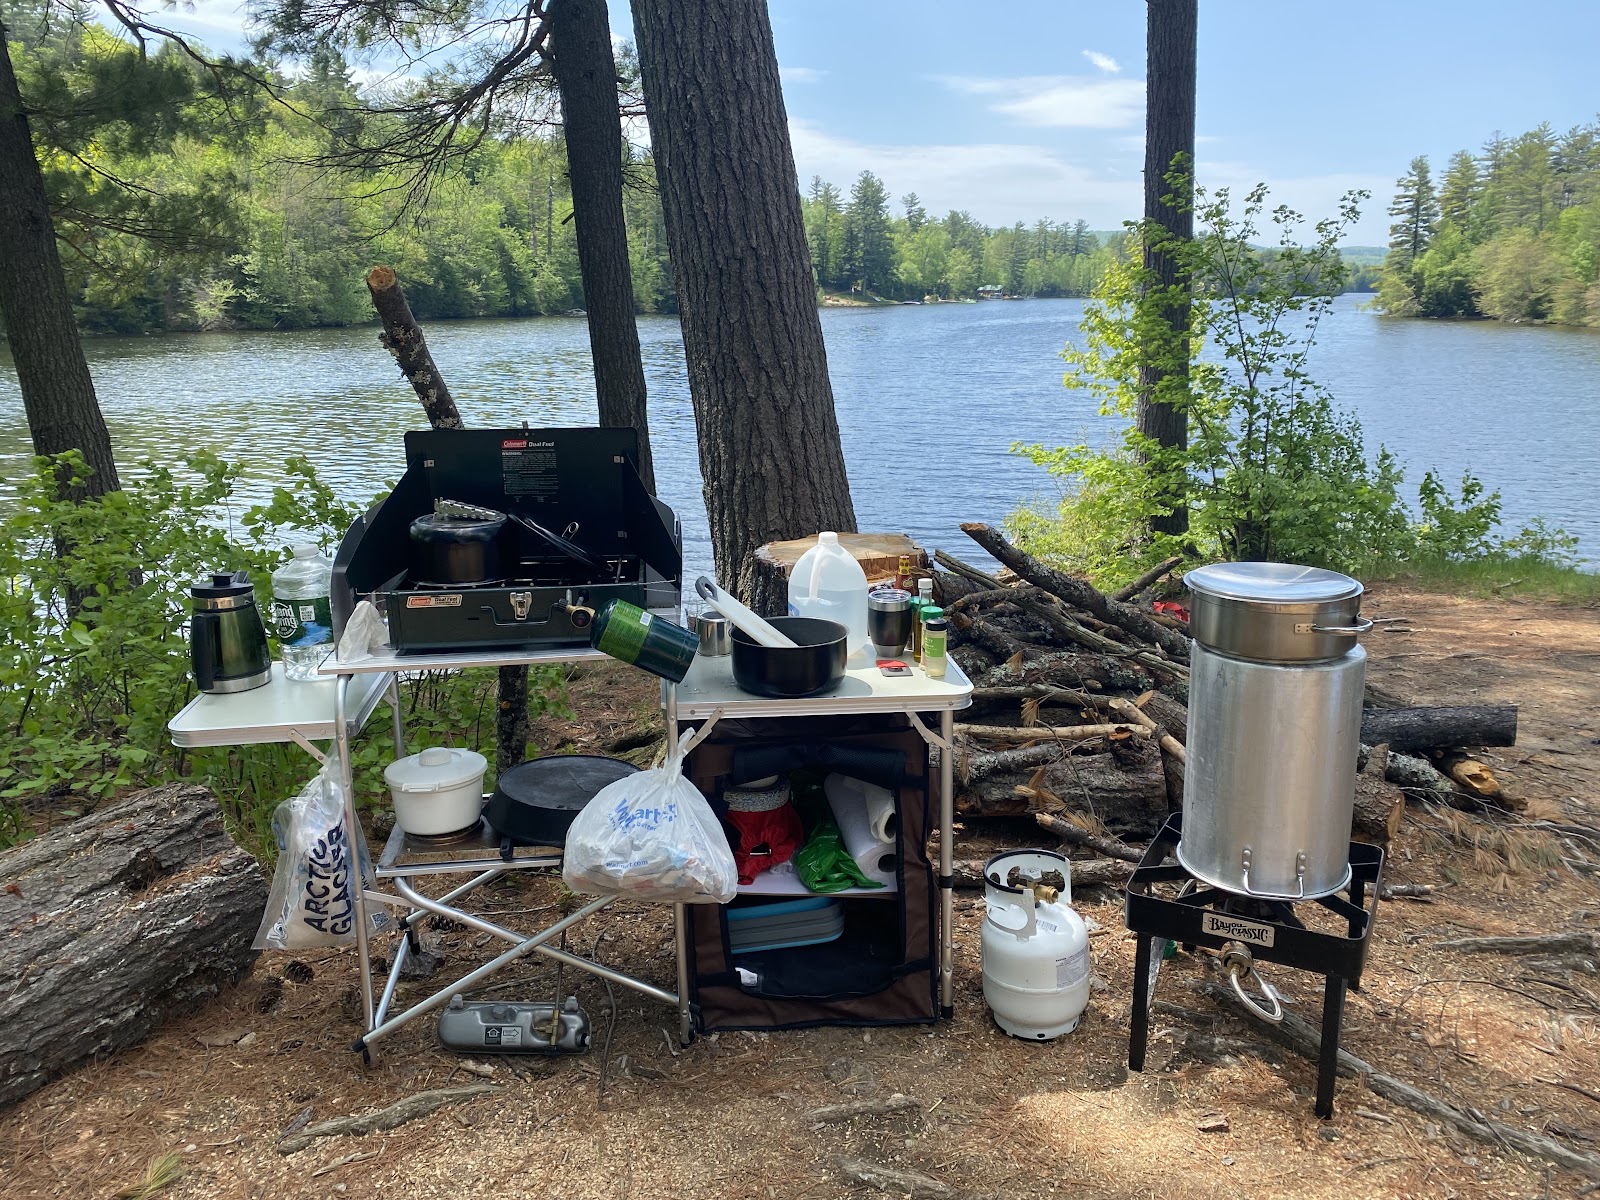 Camping Setup, Picture source: Suzanne Raphael